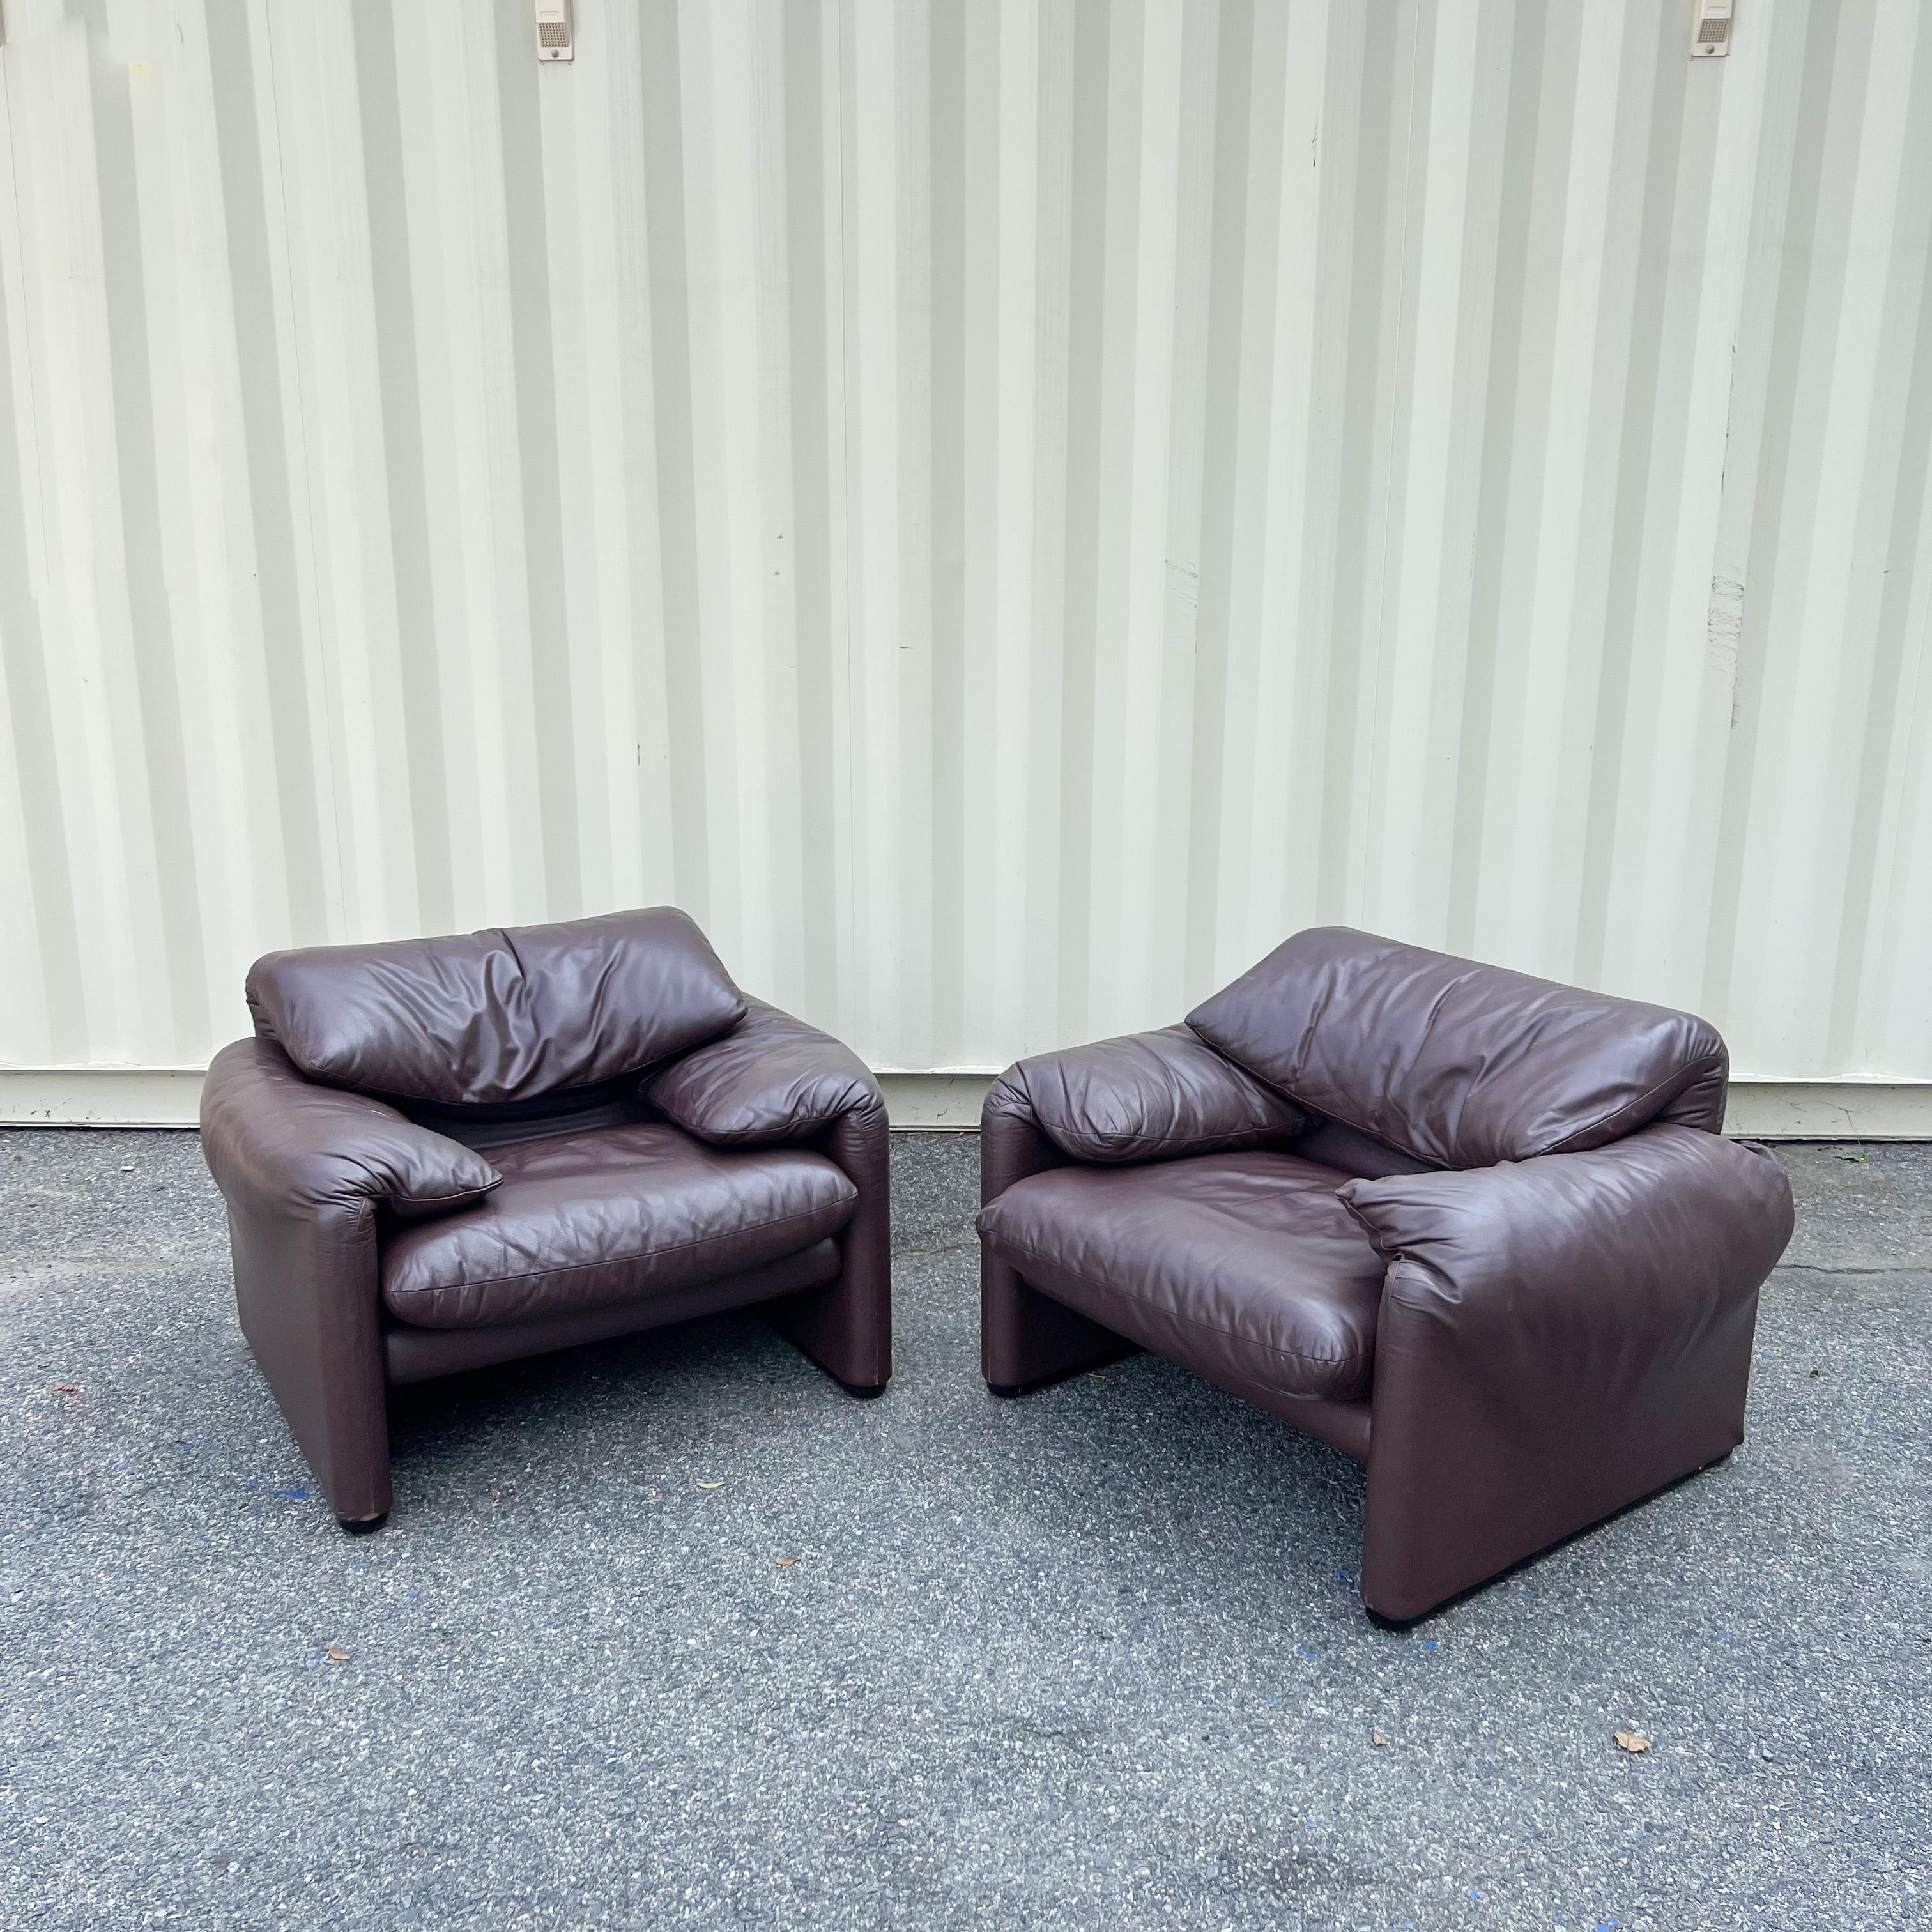 Pair of Vico Magistretti's 1973 Maralunga chairs for Cassina. Featuring the original brown leather upholstery. Some light scuffing/scratching to the leather. These chairs provide a comfortable deep seat with low armrest and have adjustable backrests